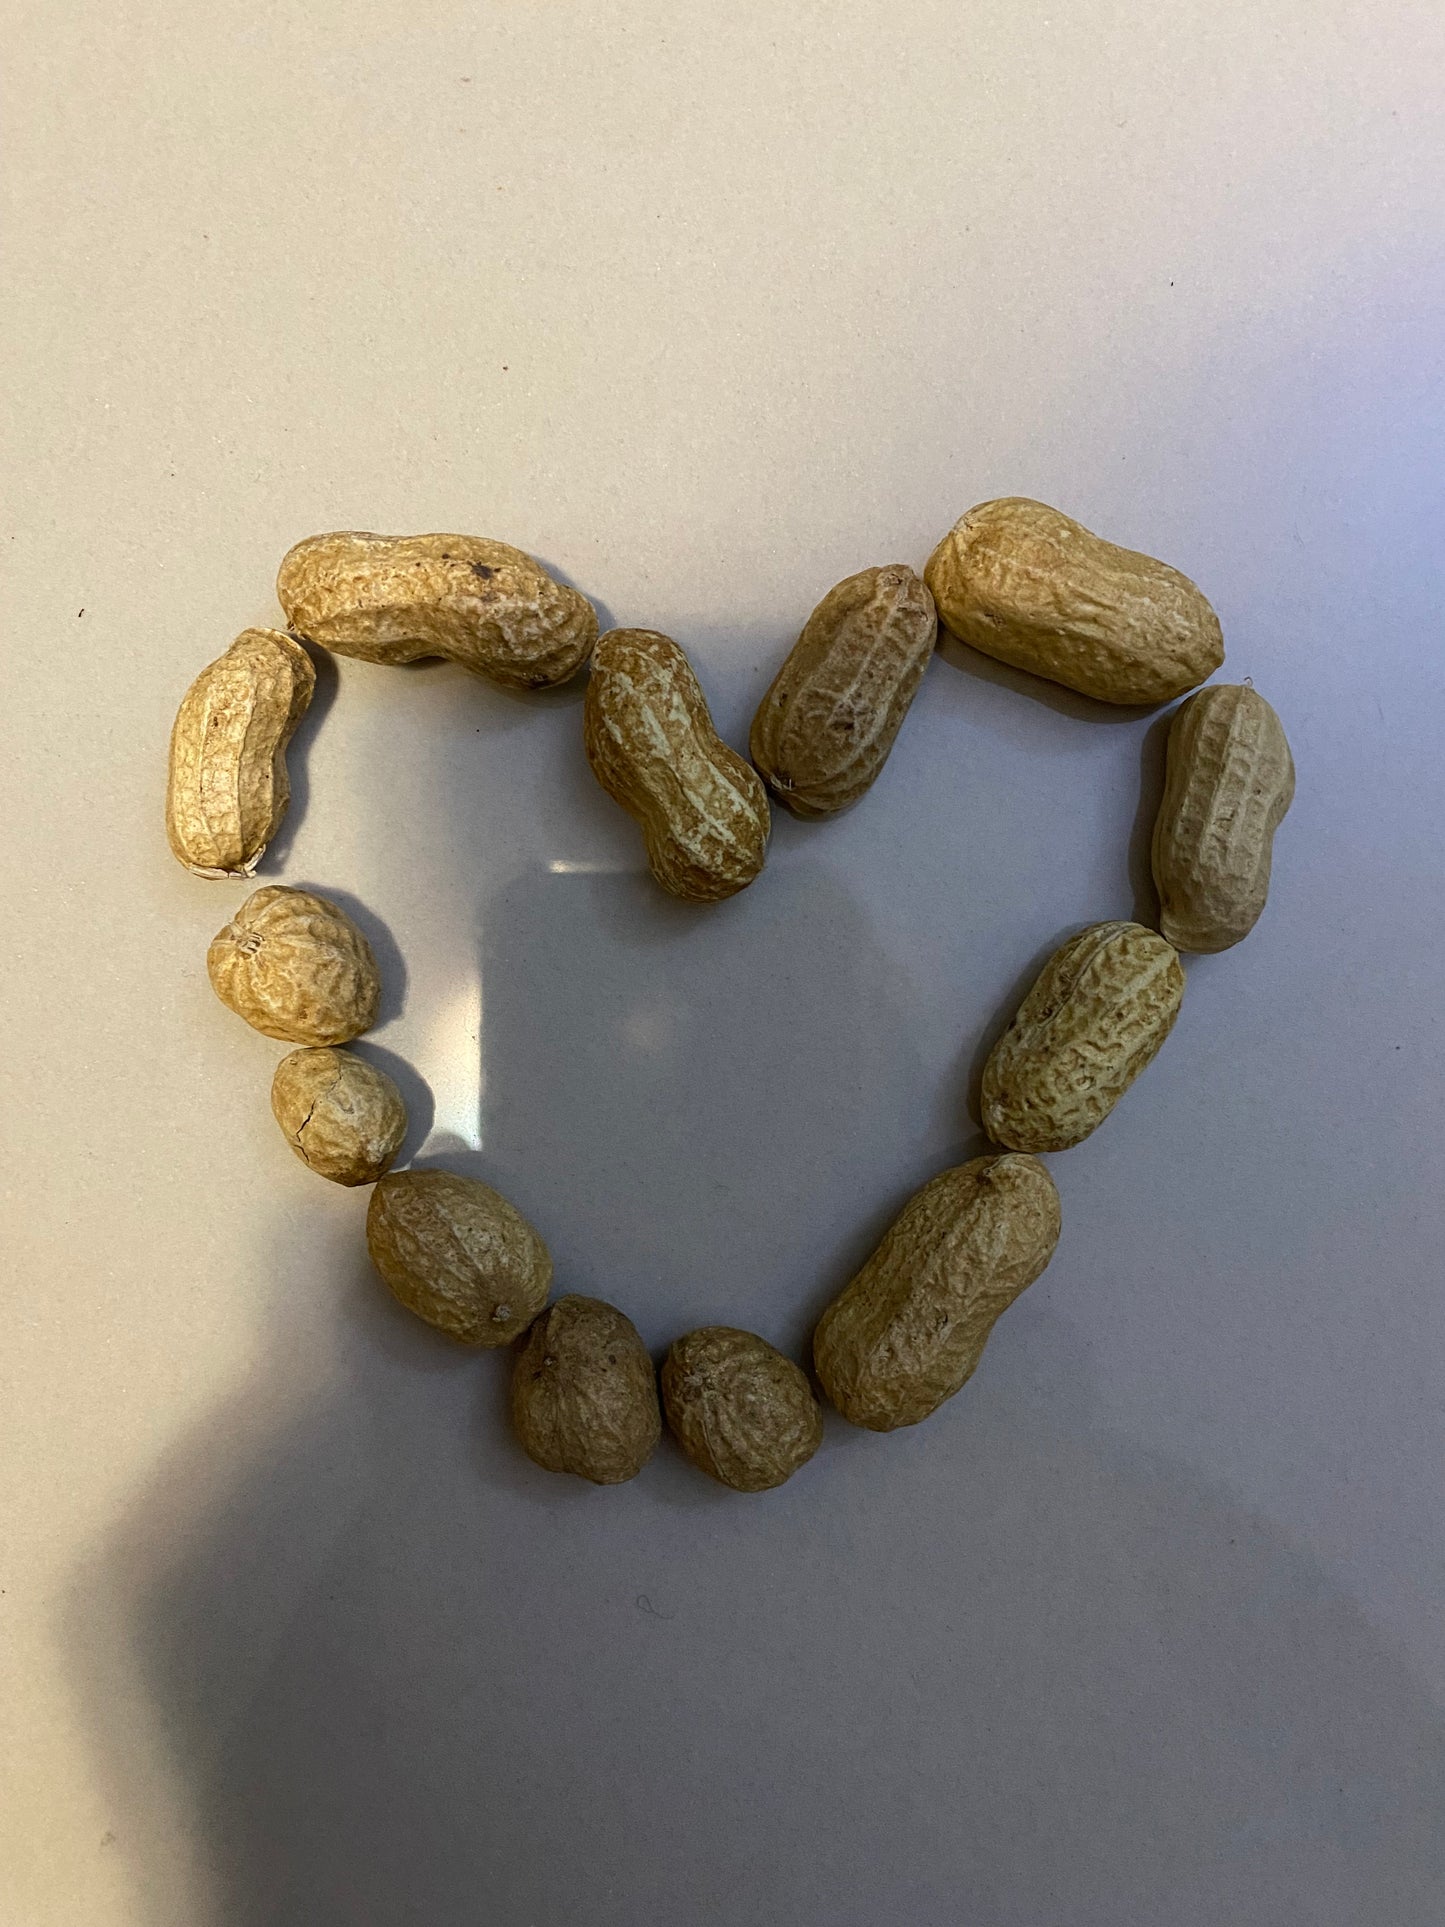 Shelled peanuts snack